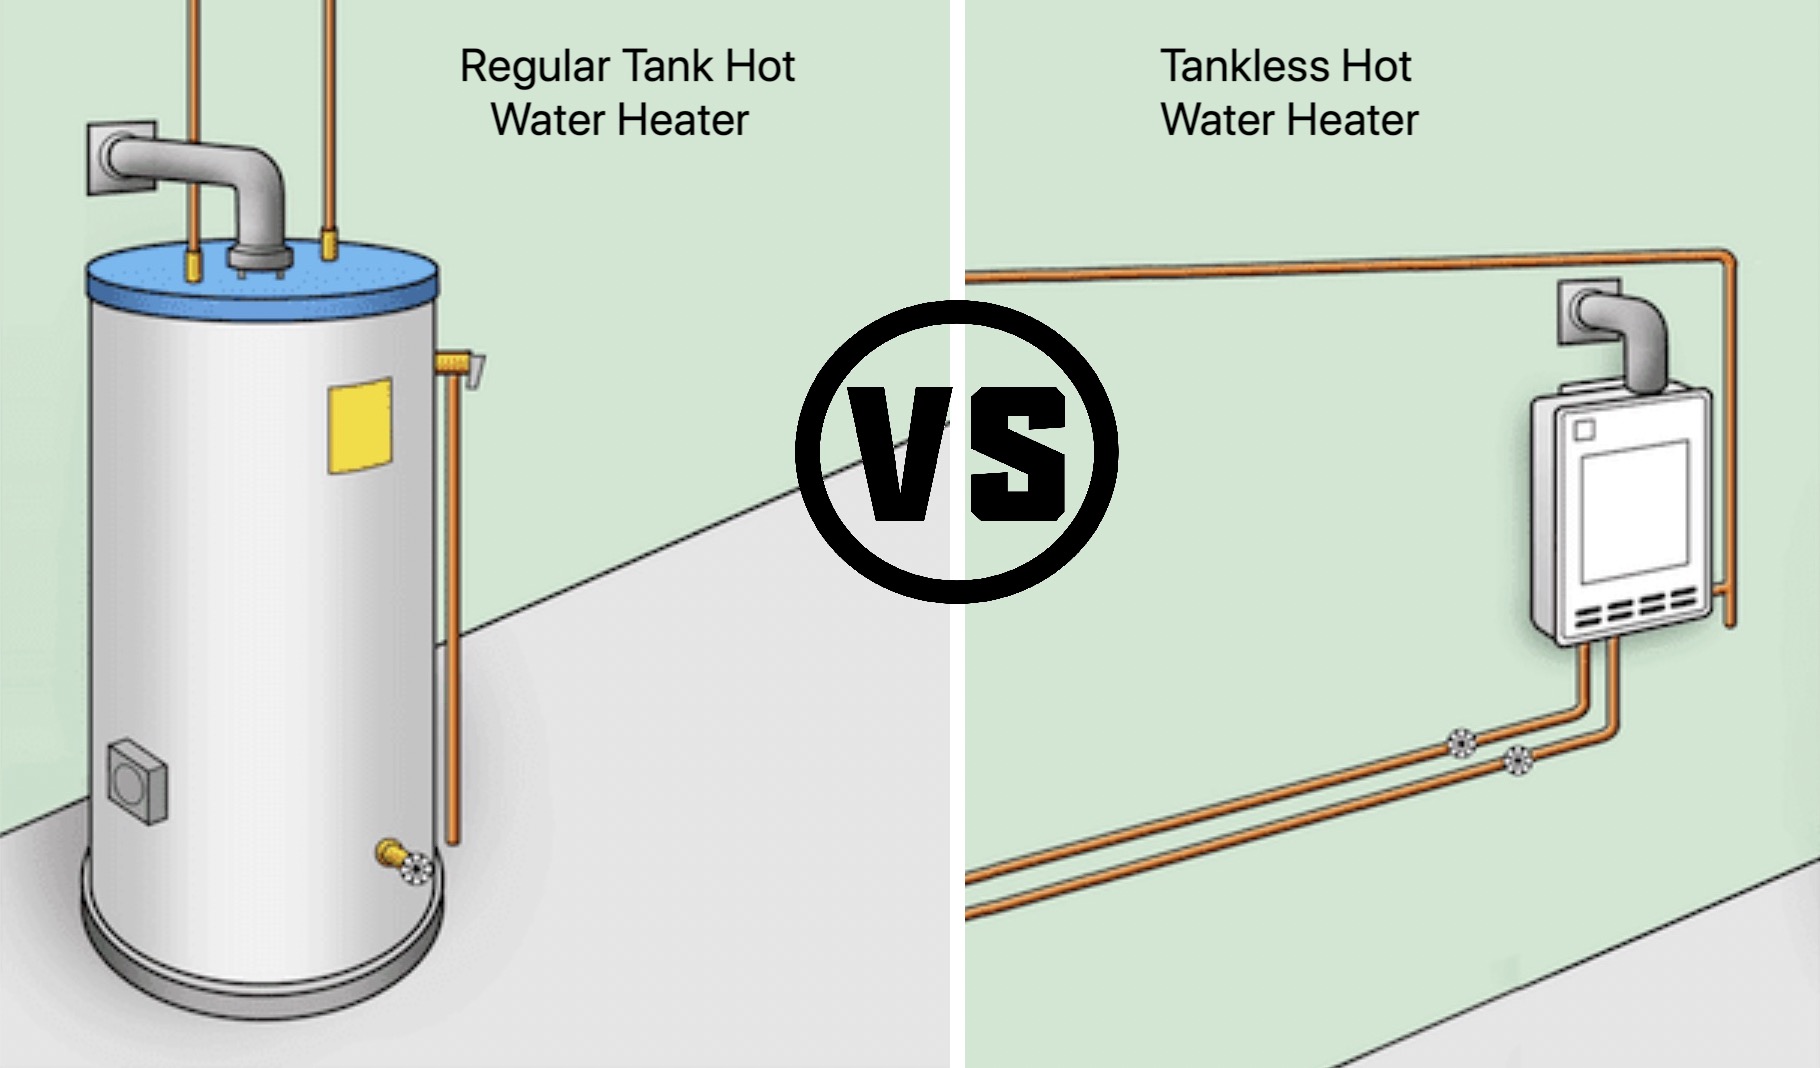 Is a tankless water heater better?